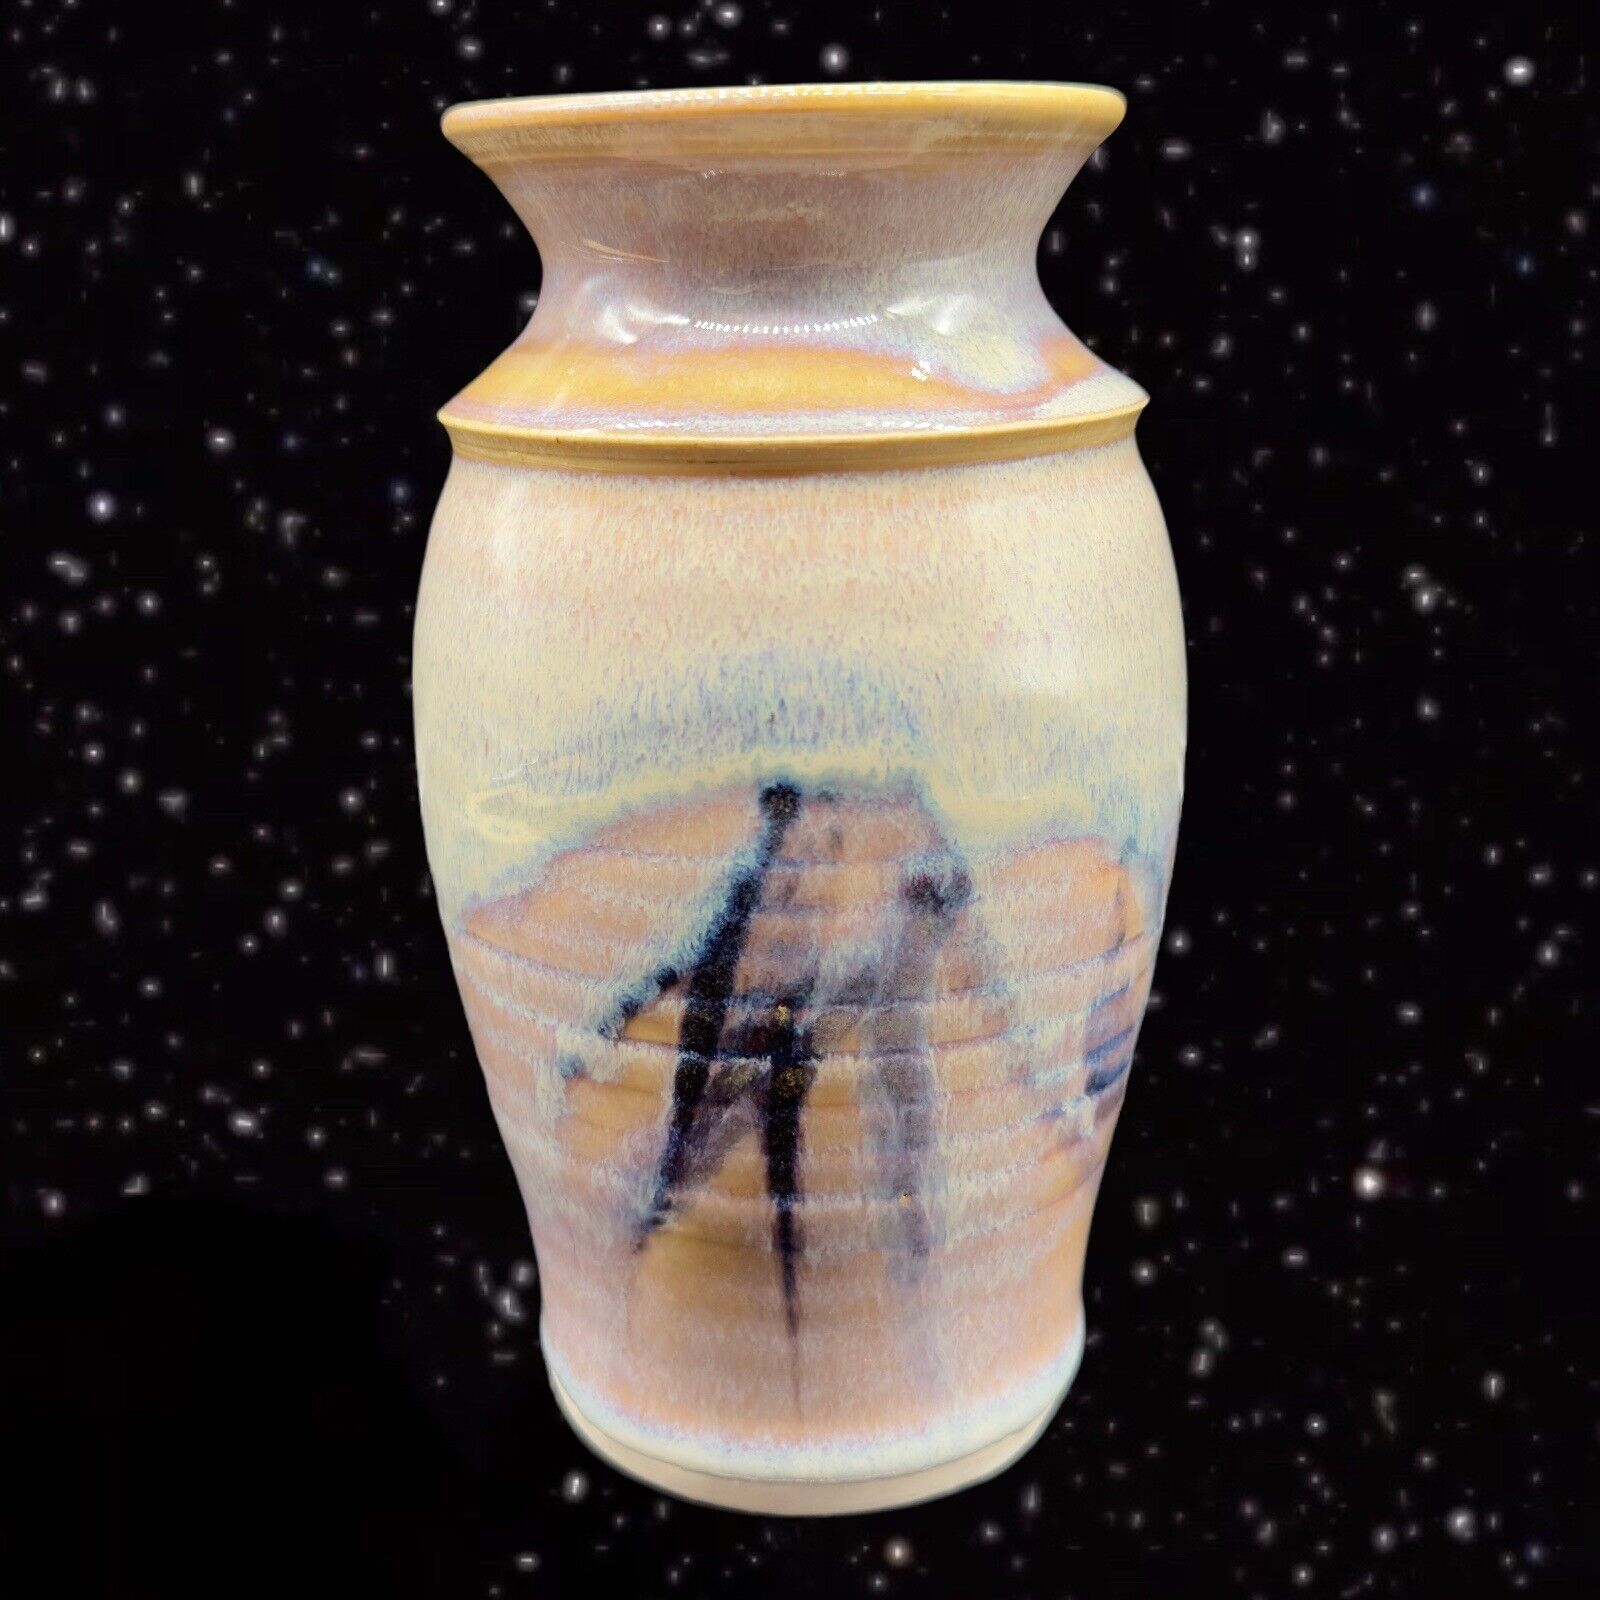 Vintage Hand Made Art Pottery Drip Glaze Signed by Artist Hand Trown 6”T 3”W